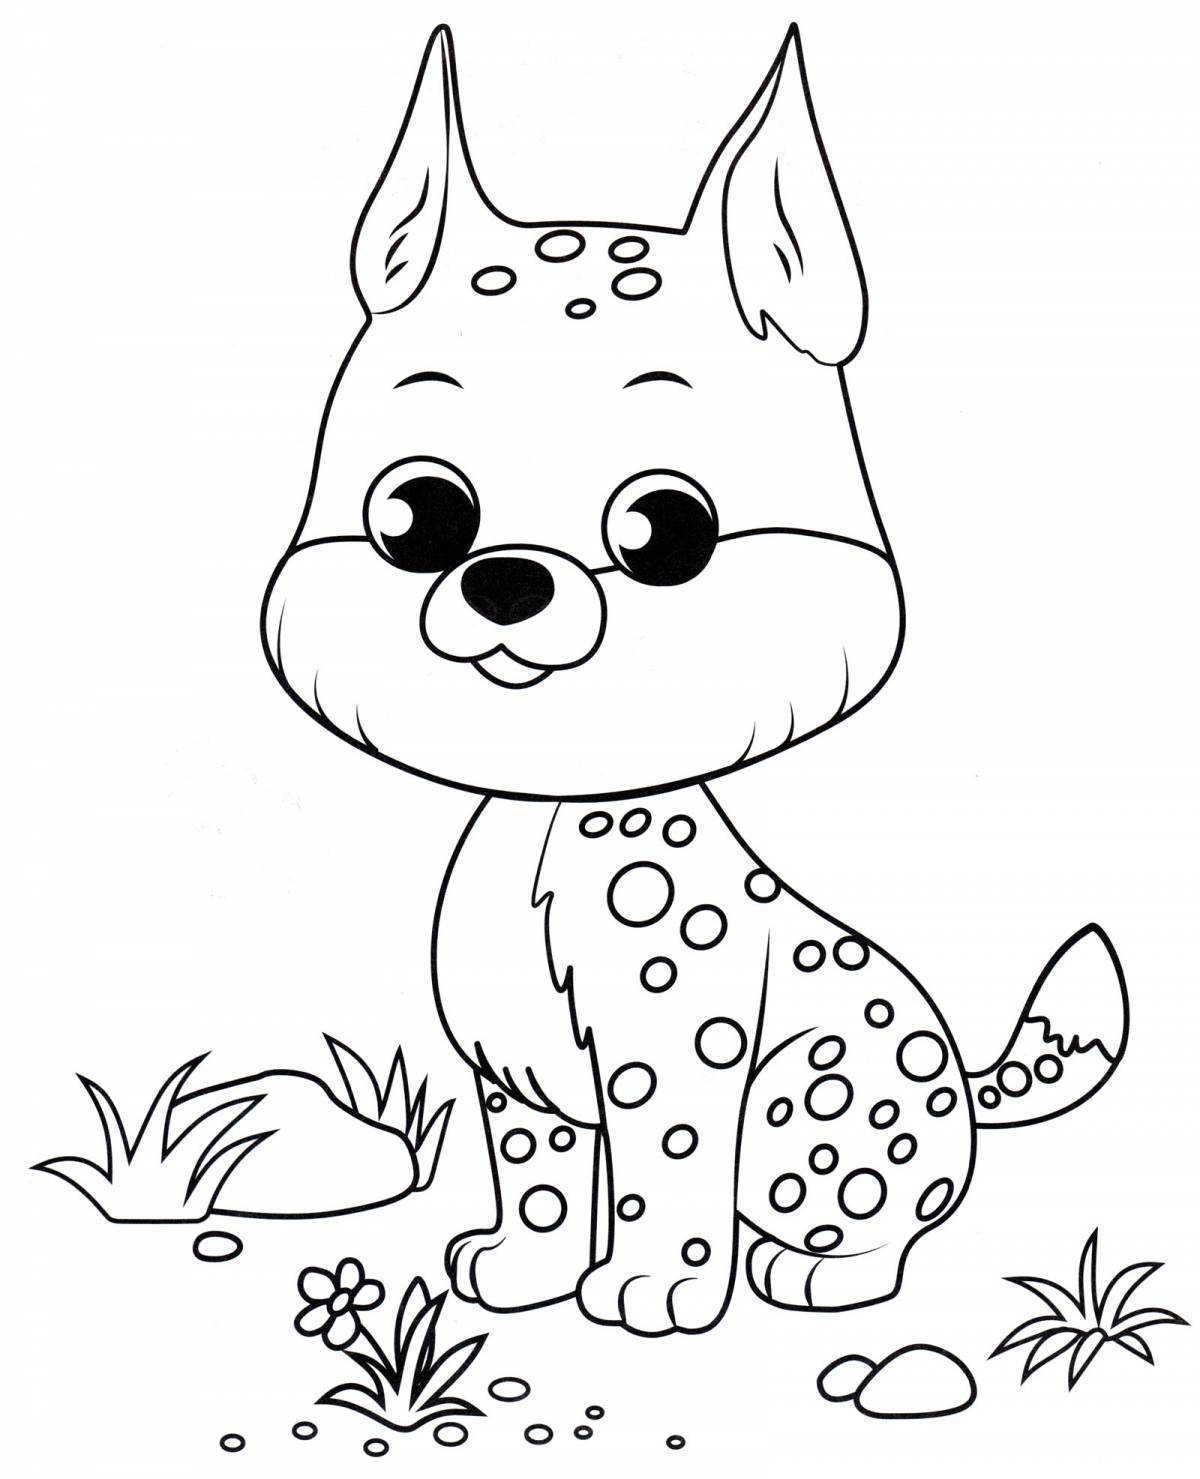 Awesome craybaby coloring book